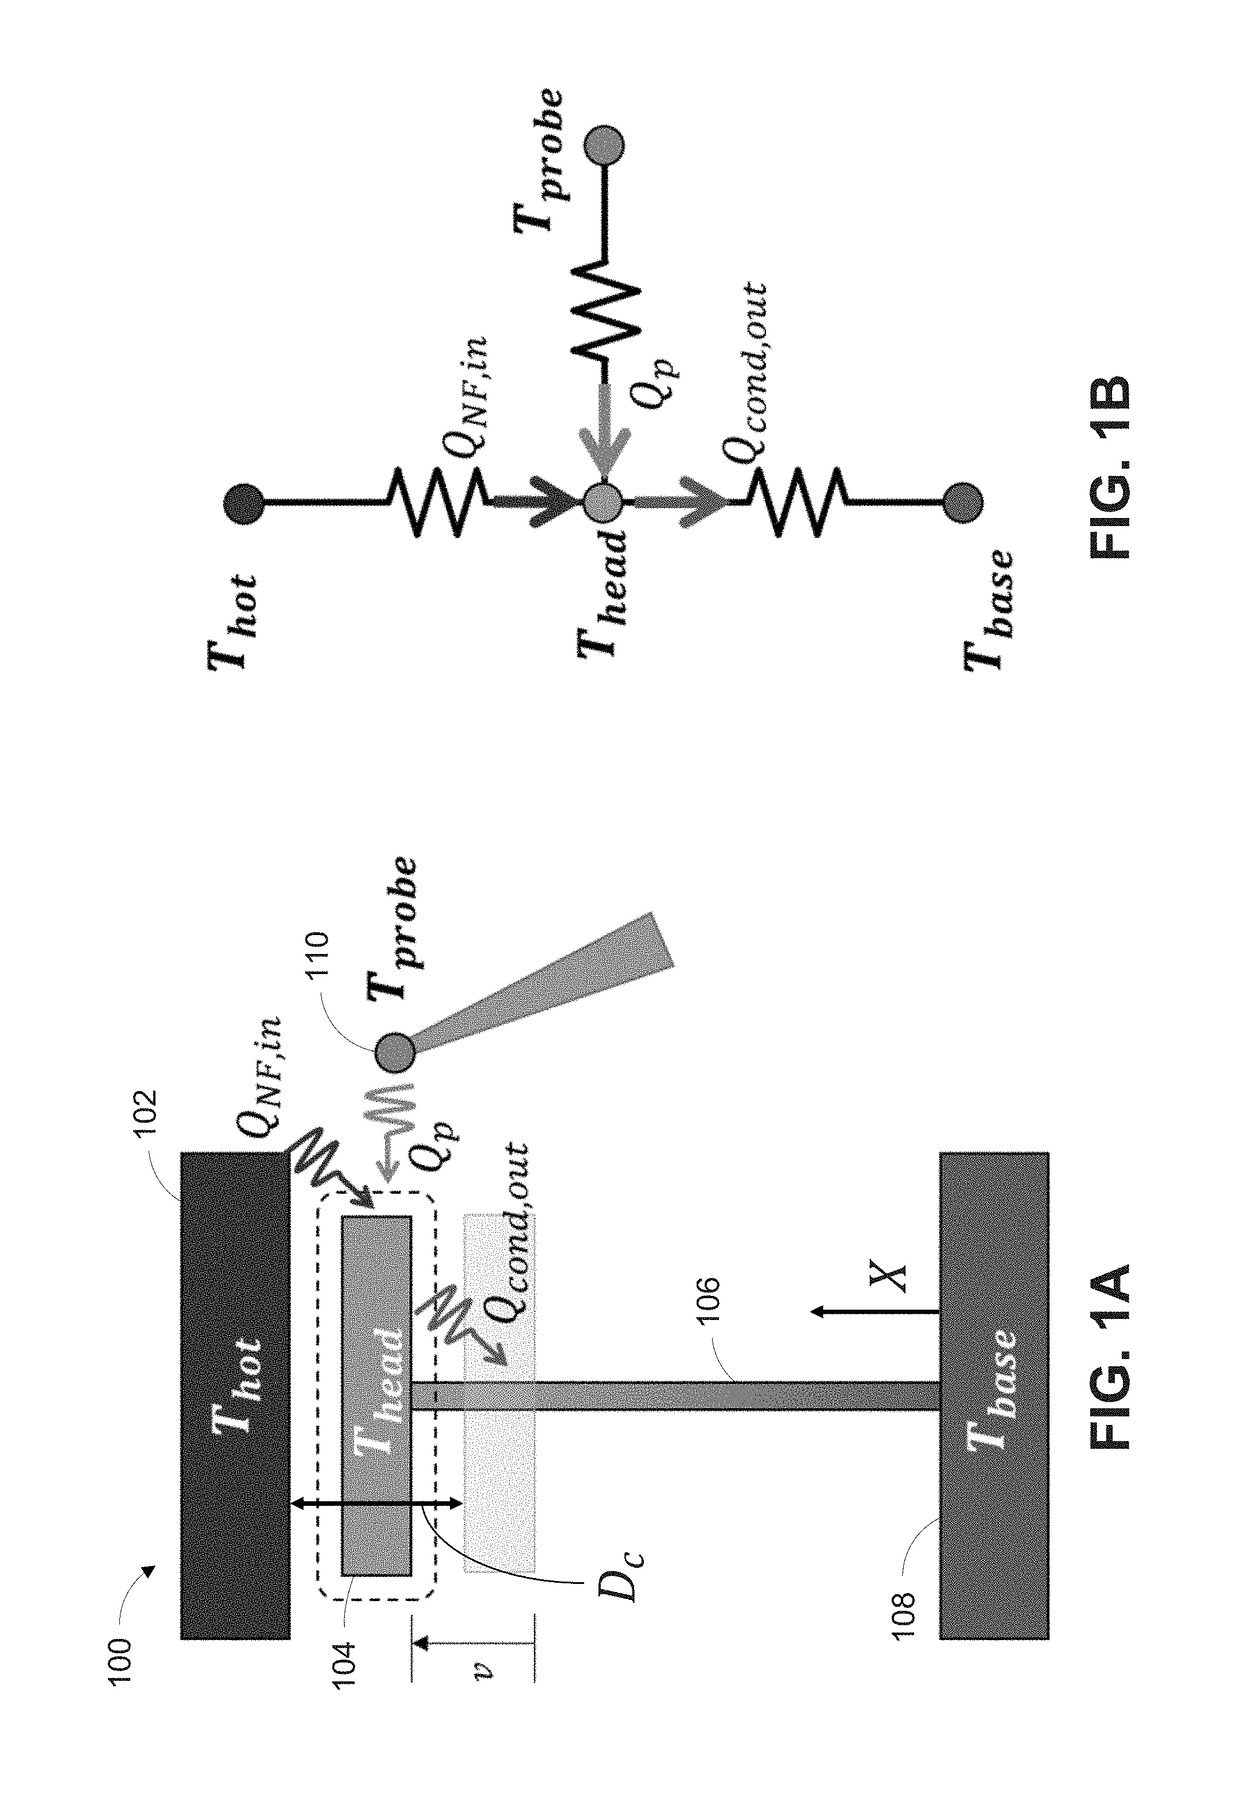 Near-field heat transfer enabled nanothermomechanical memory and logic devices